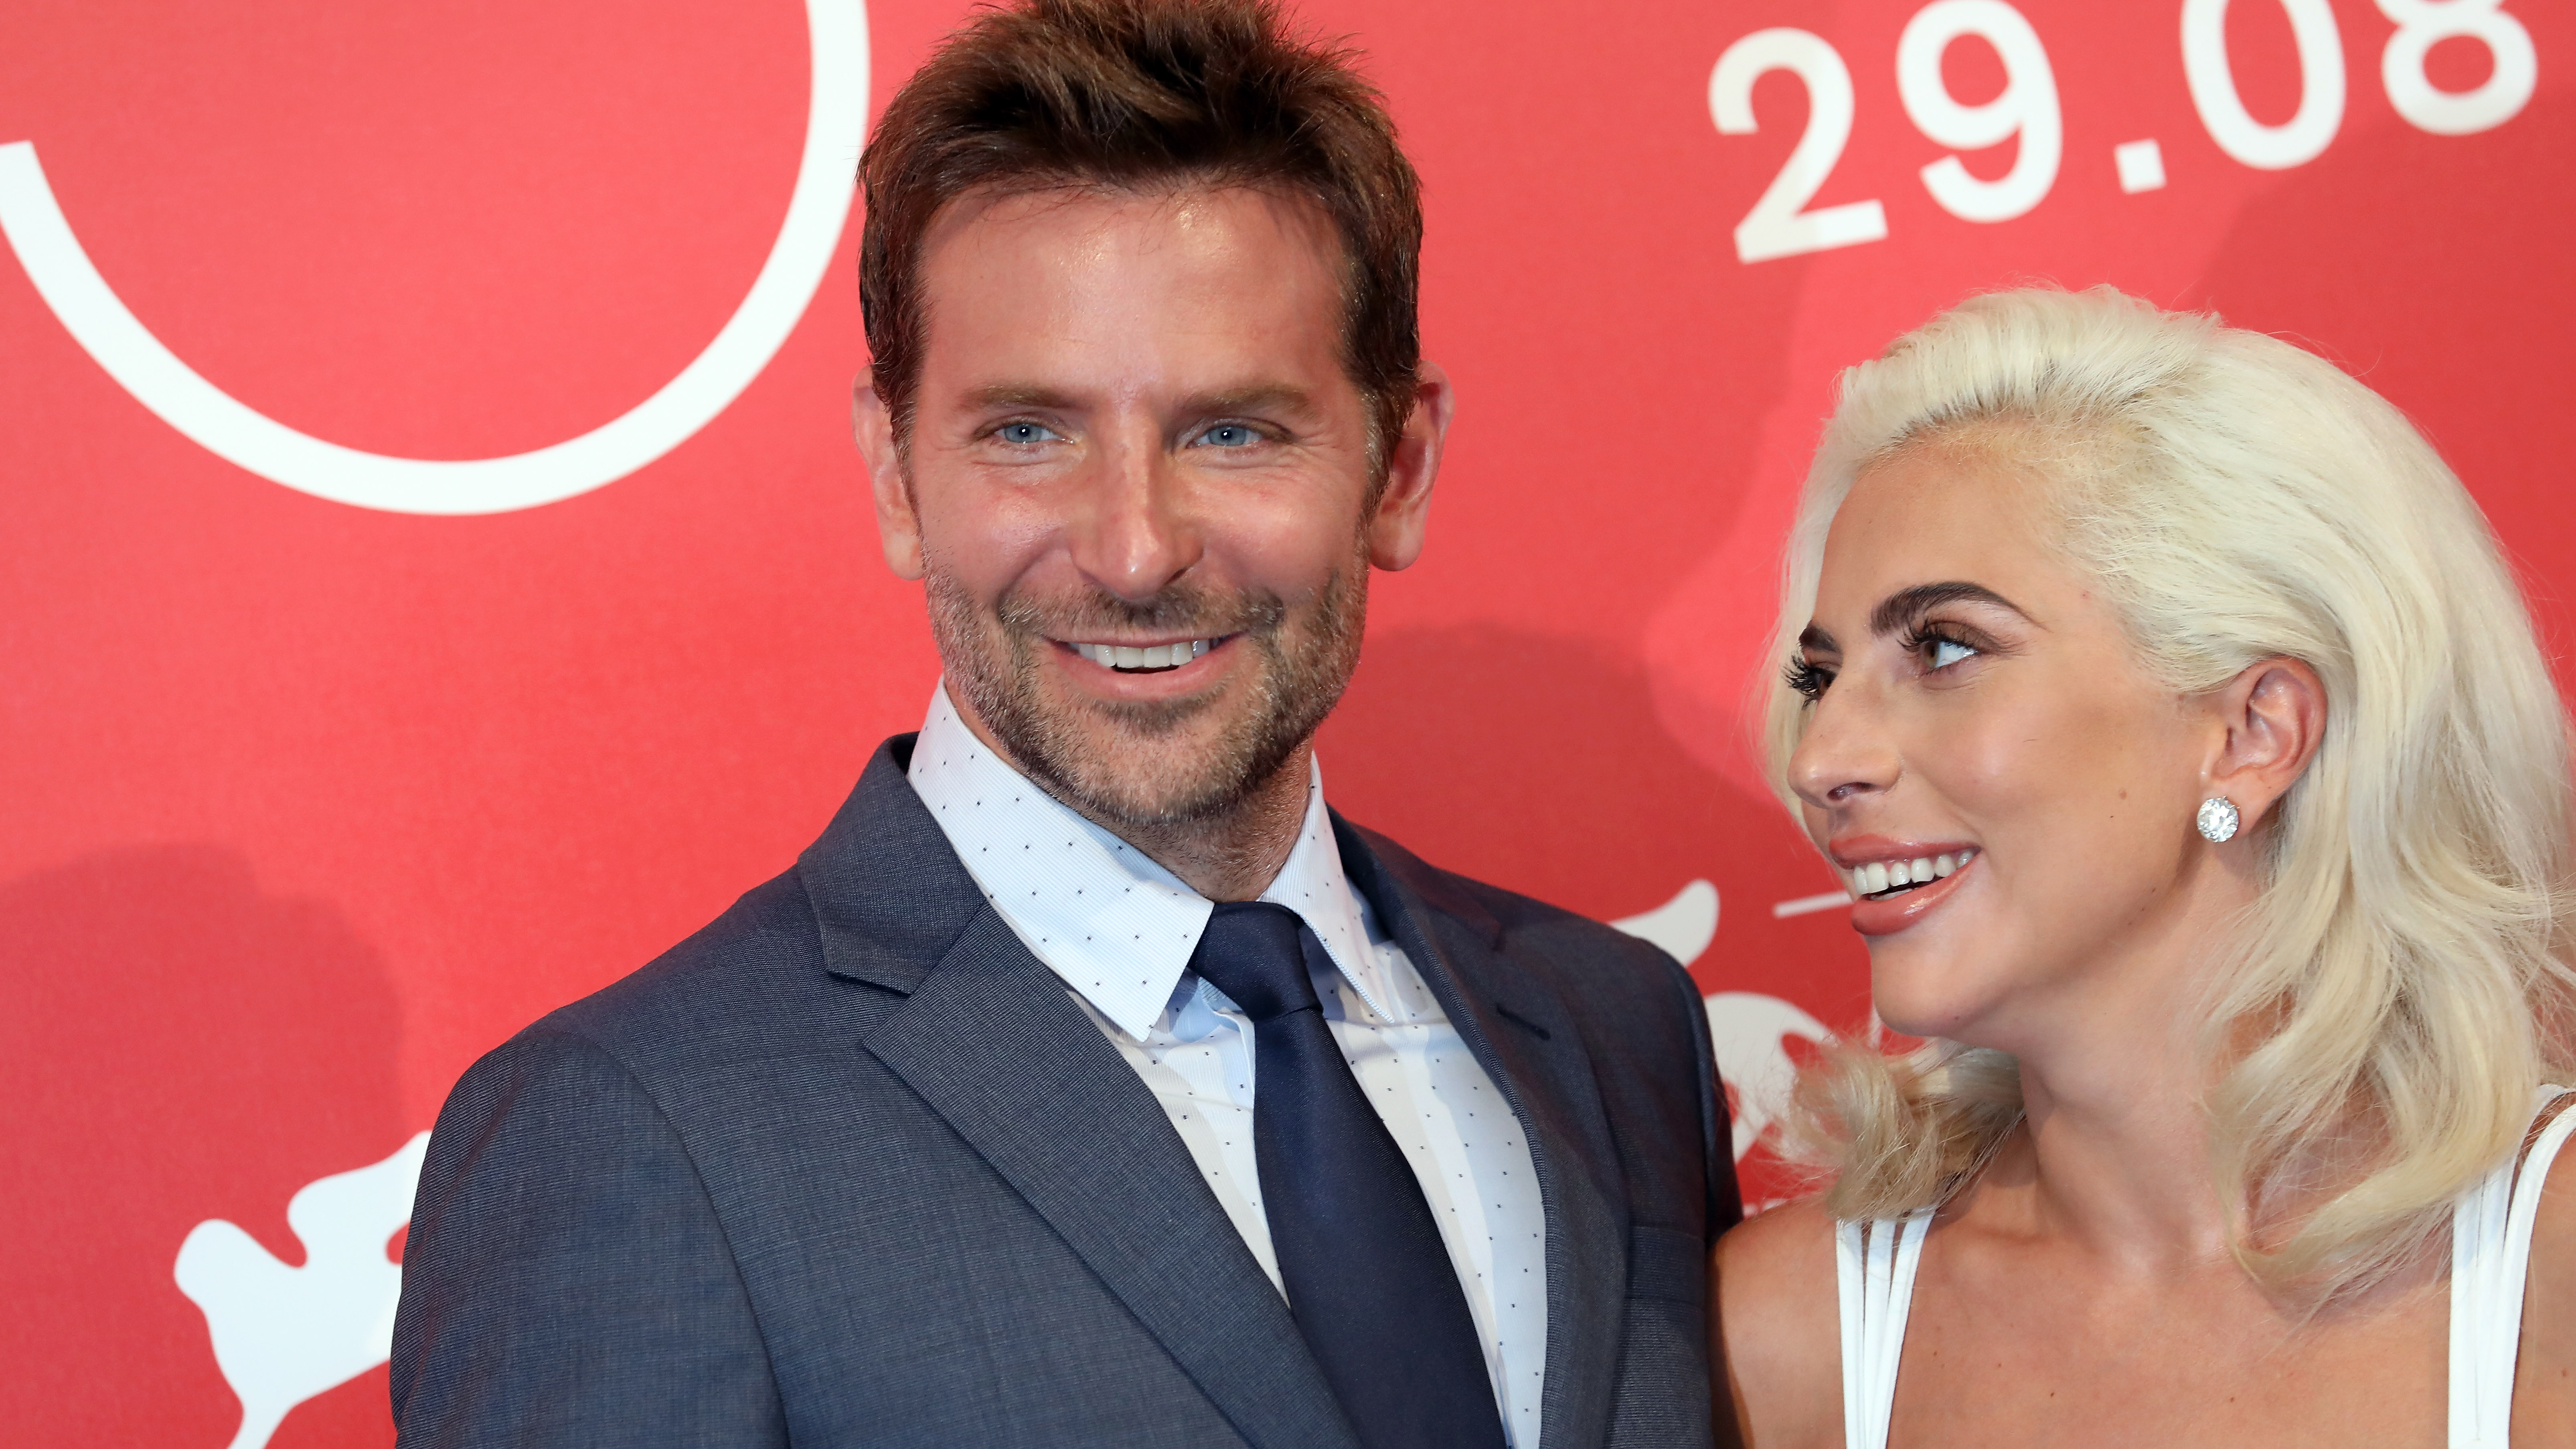 Who is bradley cooper married to